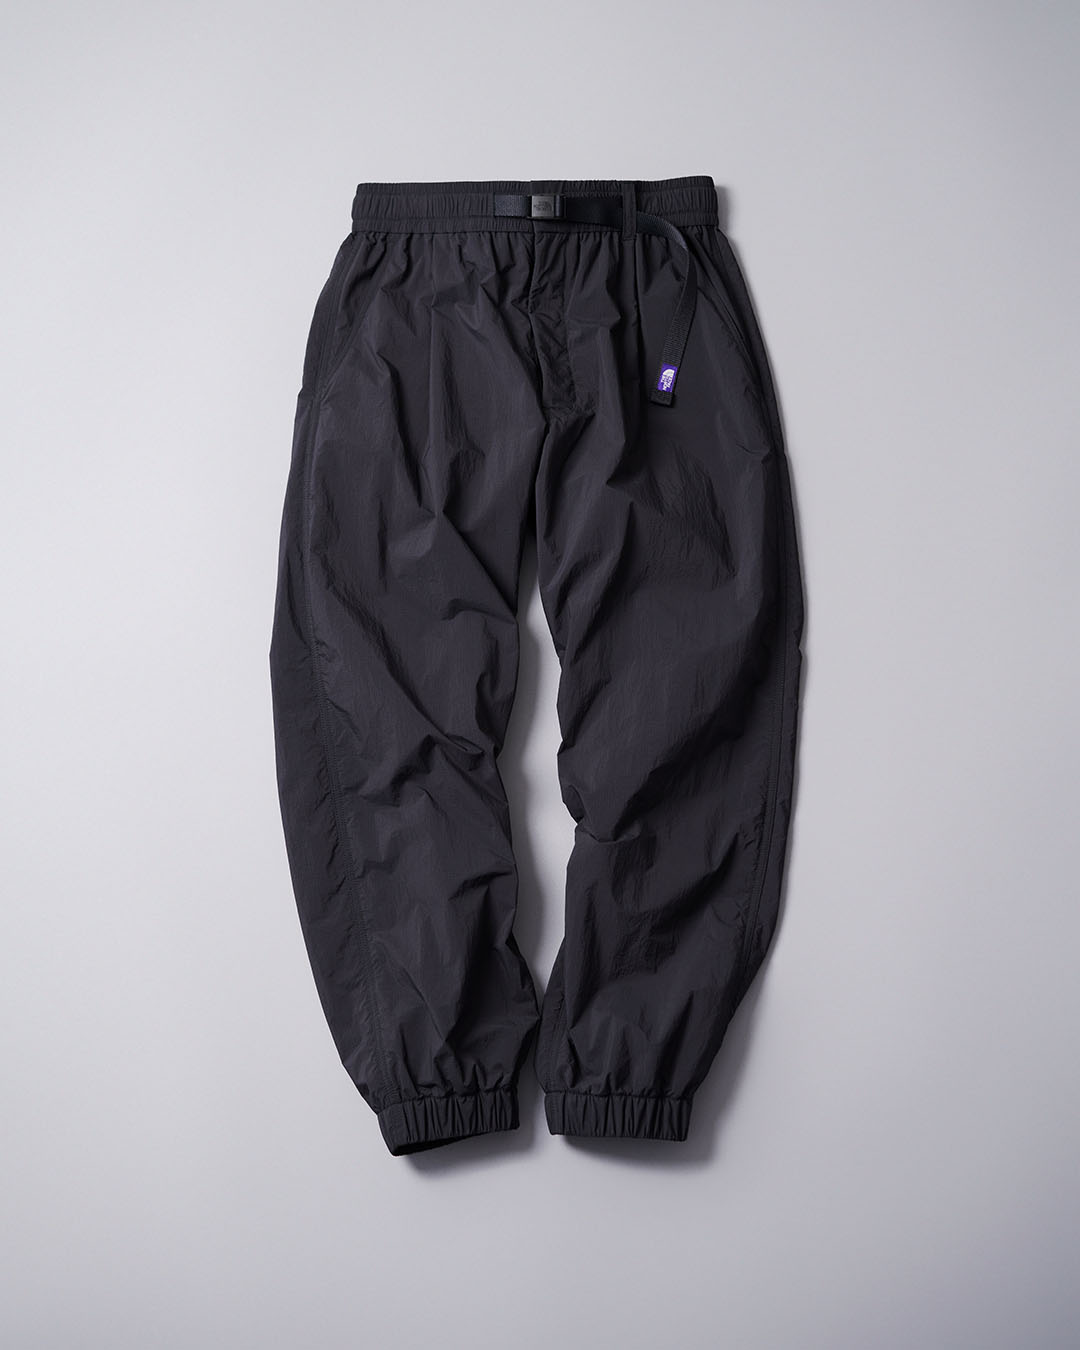 nanamica / THE NORTH FACE PURPLE LABEL / Featured Product vol.49